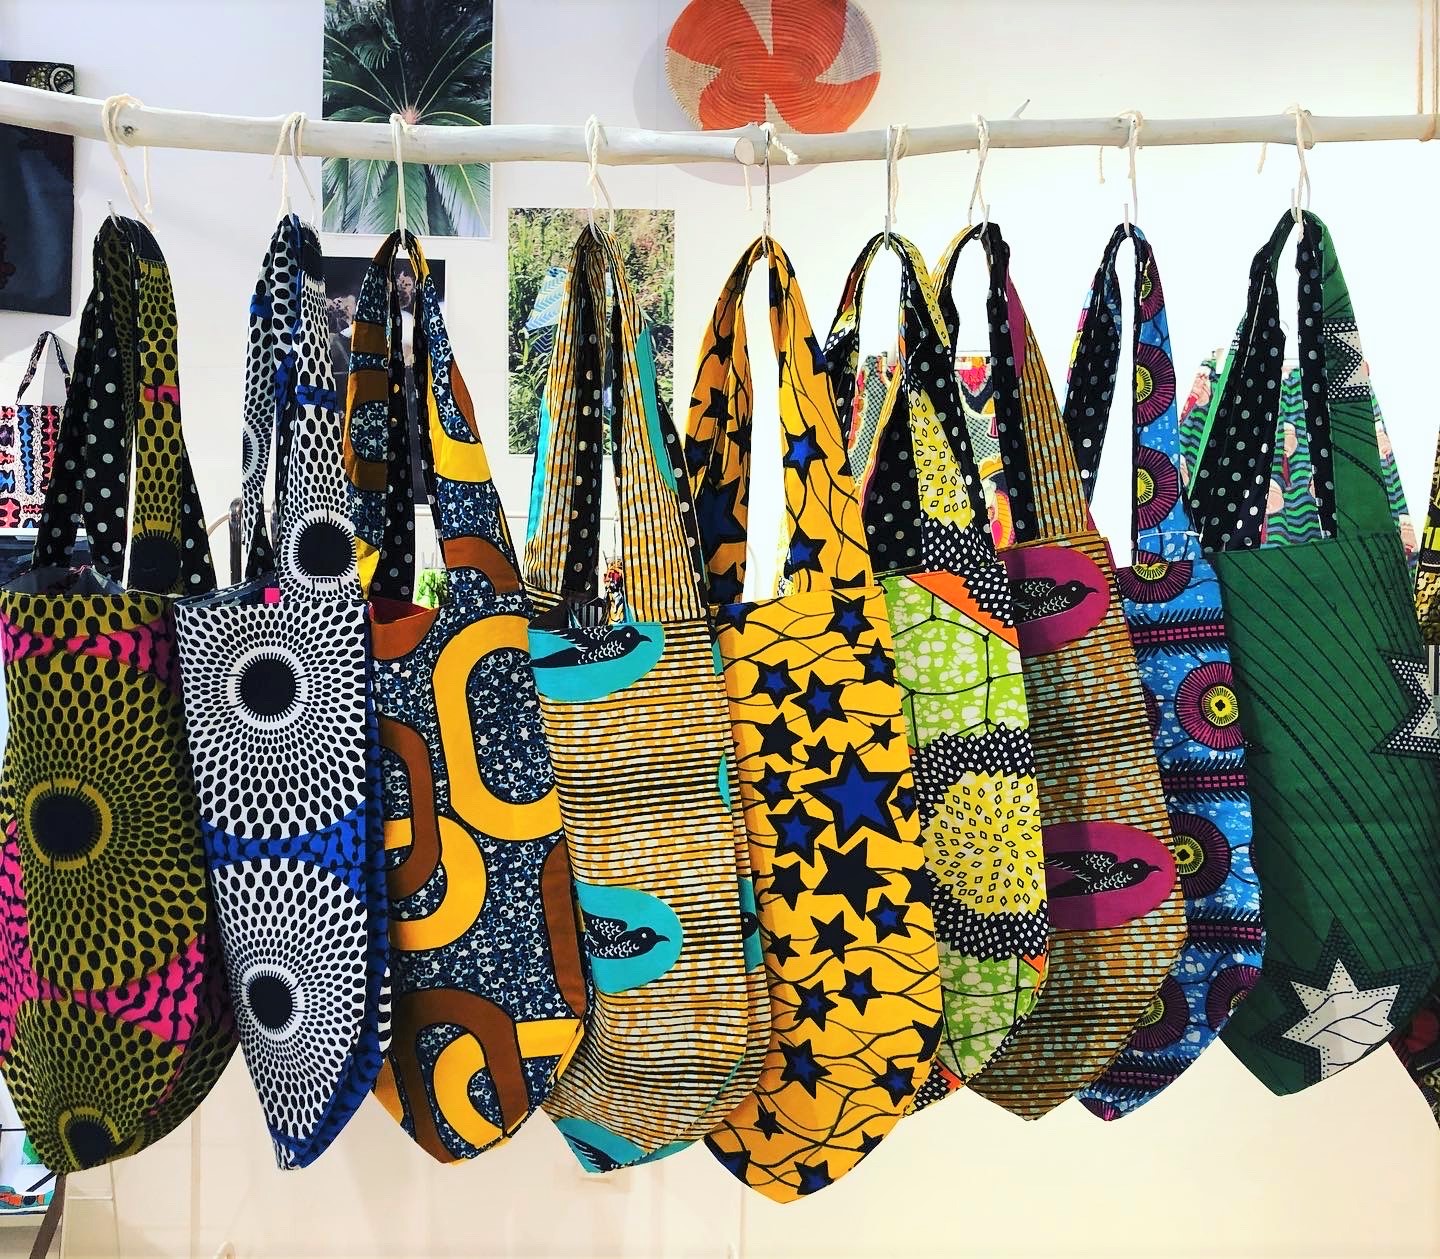 7/6Wed.-10Sun.『African textile 煌めく色との出会い2022-ボトムお渡し会＆展示販売会』